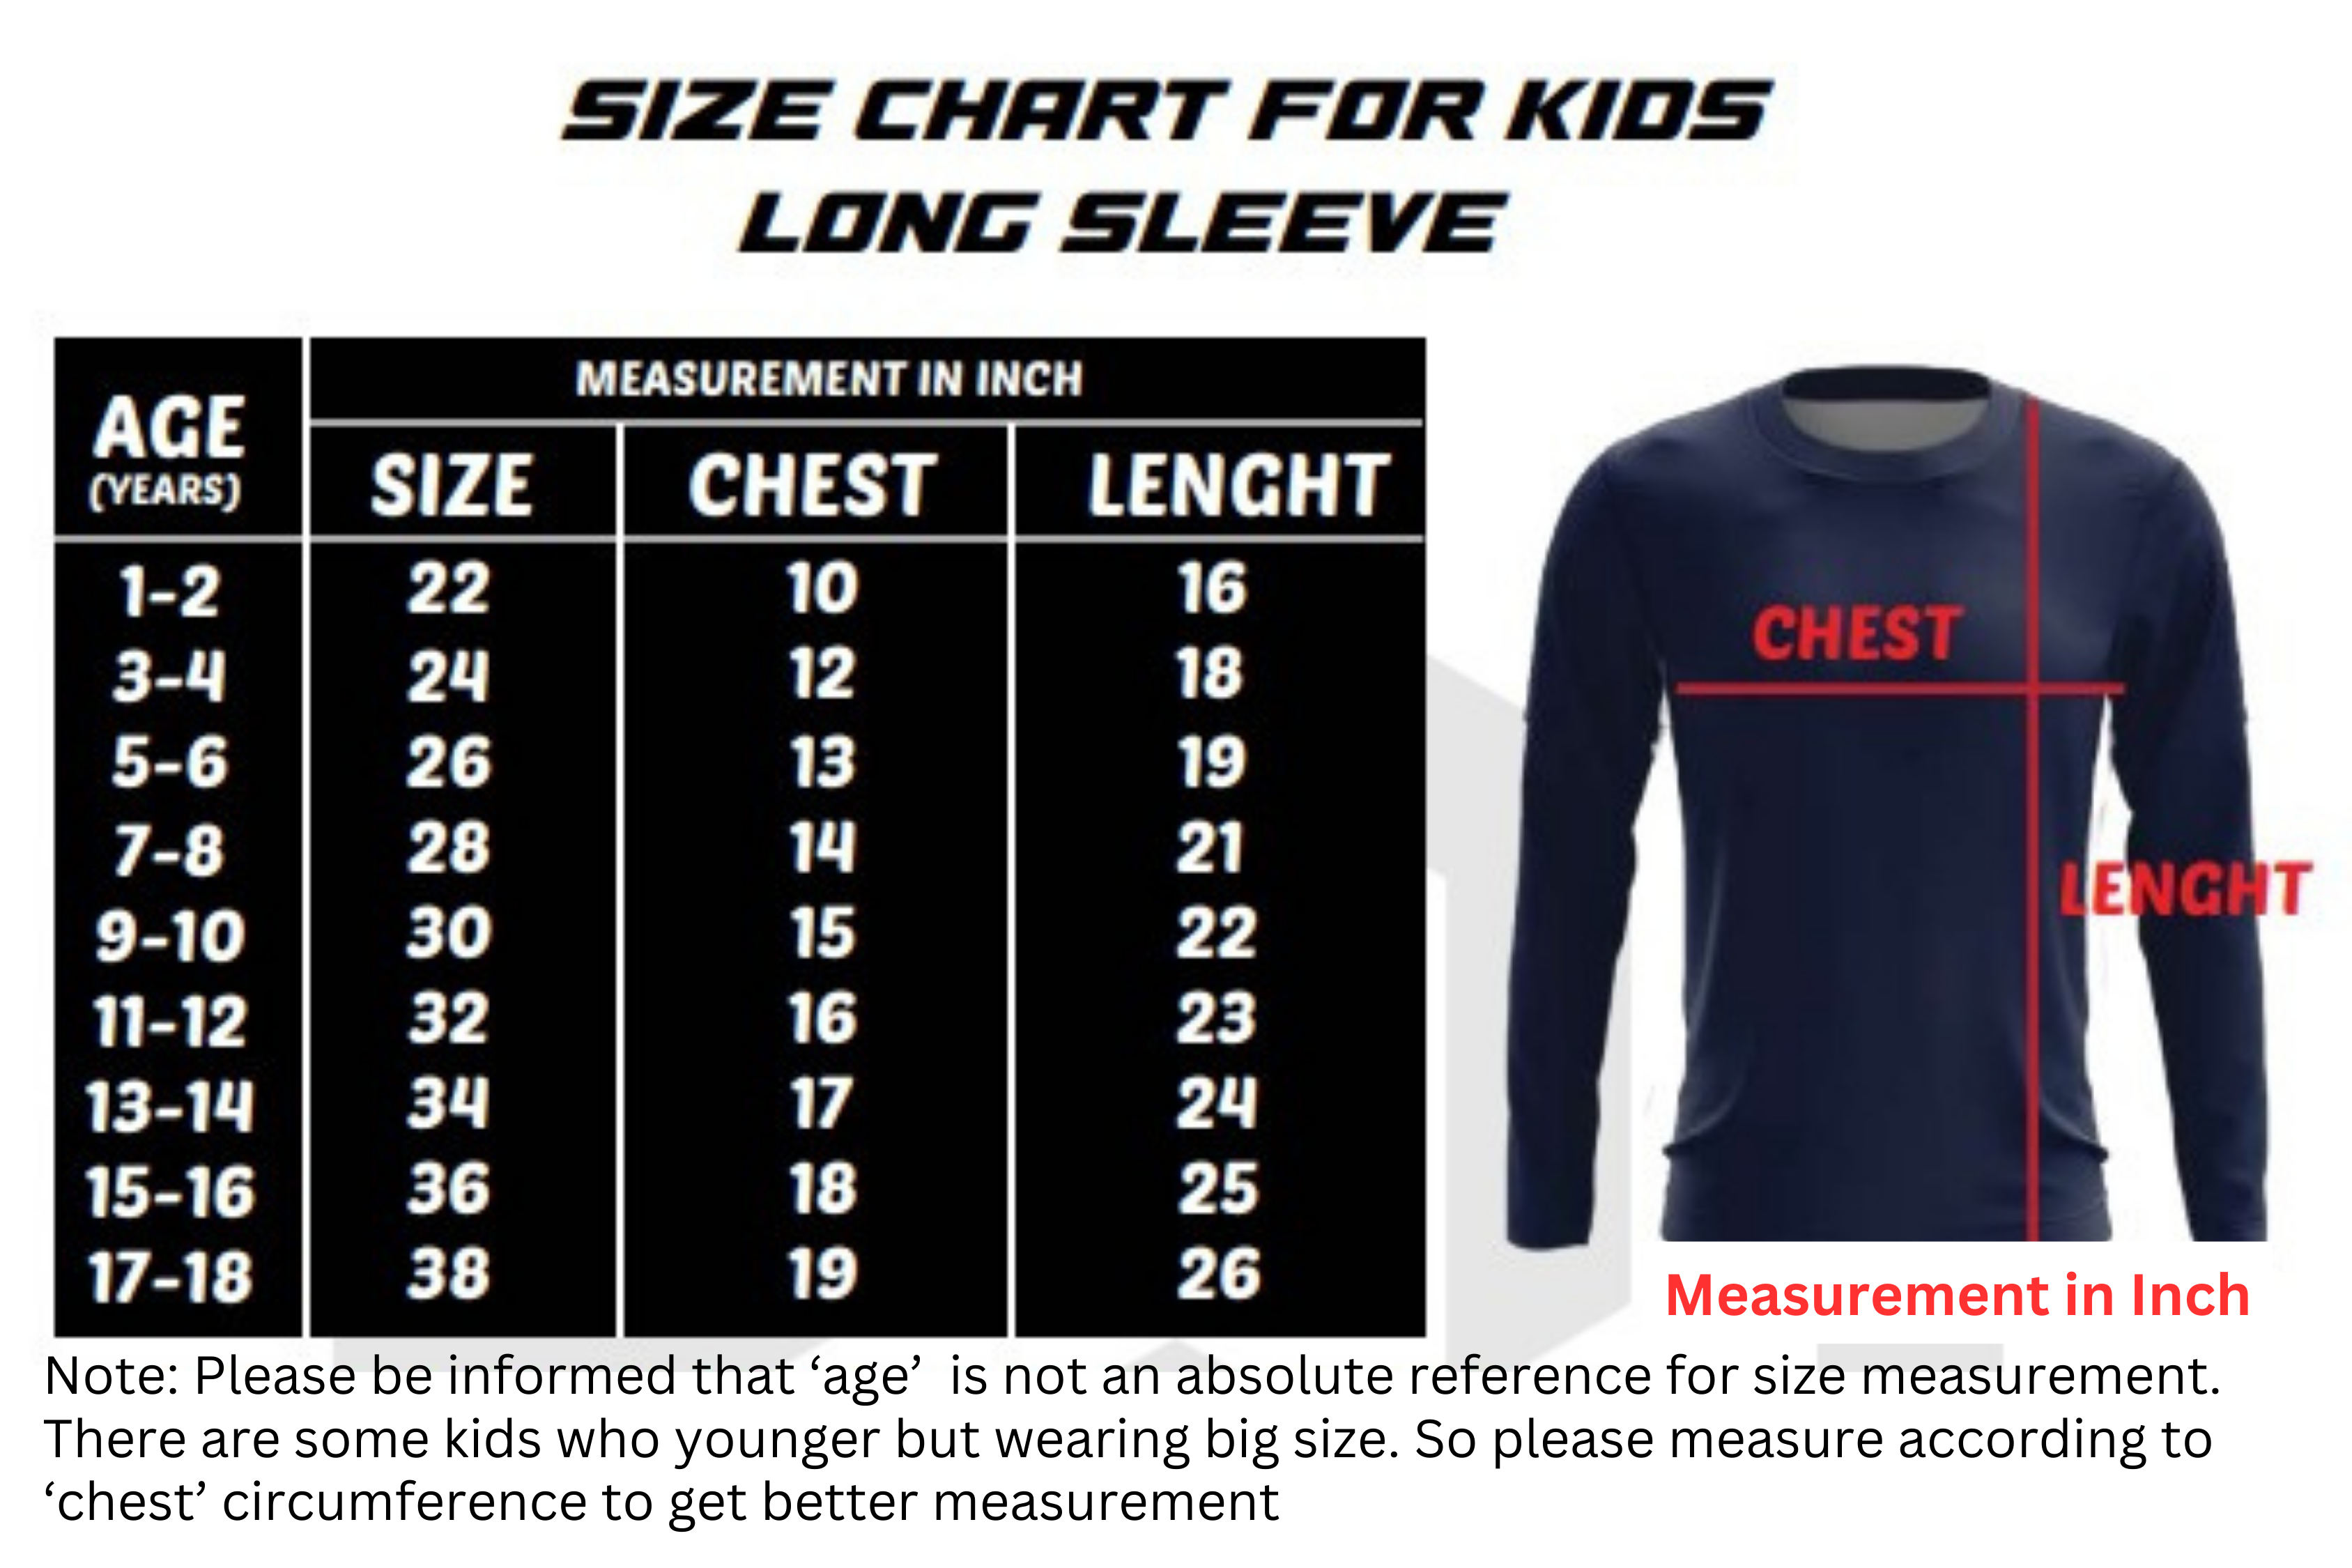 Note Please be informed that ‘age’ is not an absolute reference for size measurement. There are some kids who younger but wearing big size. So please measure according to ‘chest’ to get better mea (2)